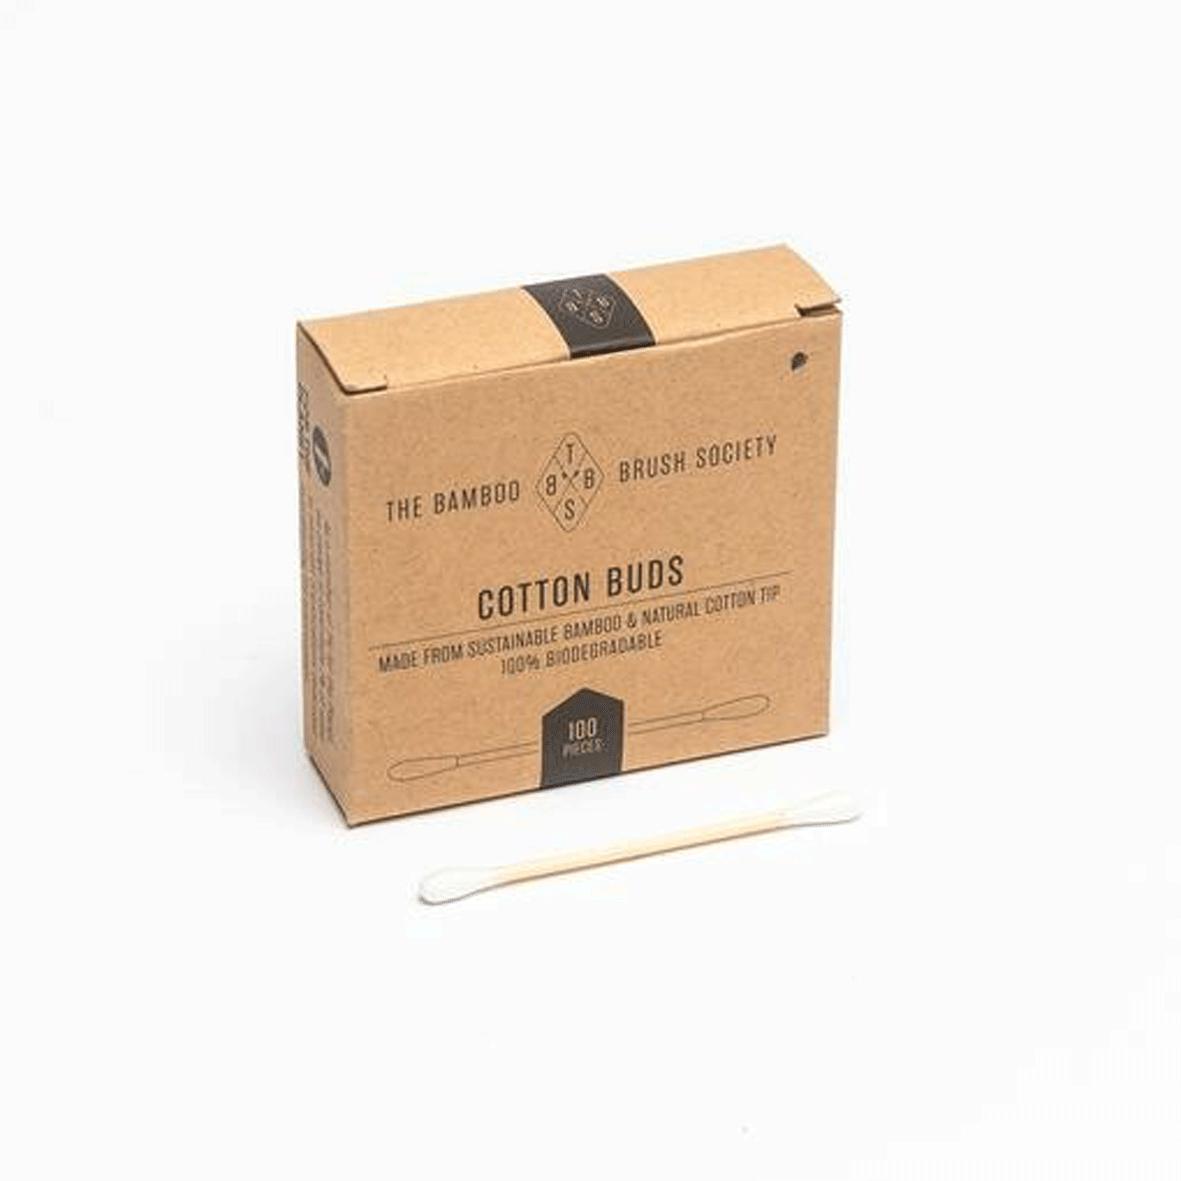 The Bamboo Brush Society Cotton Buds